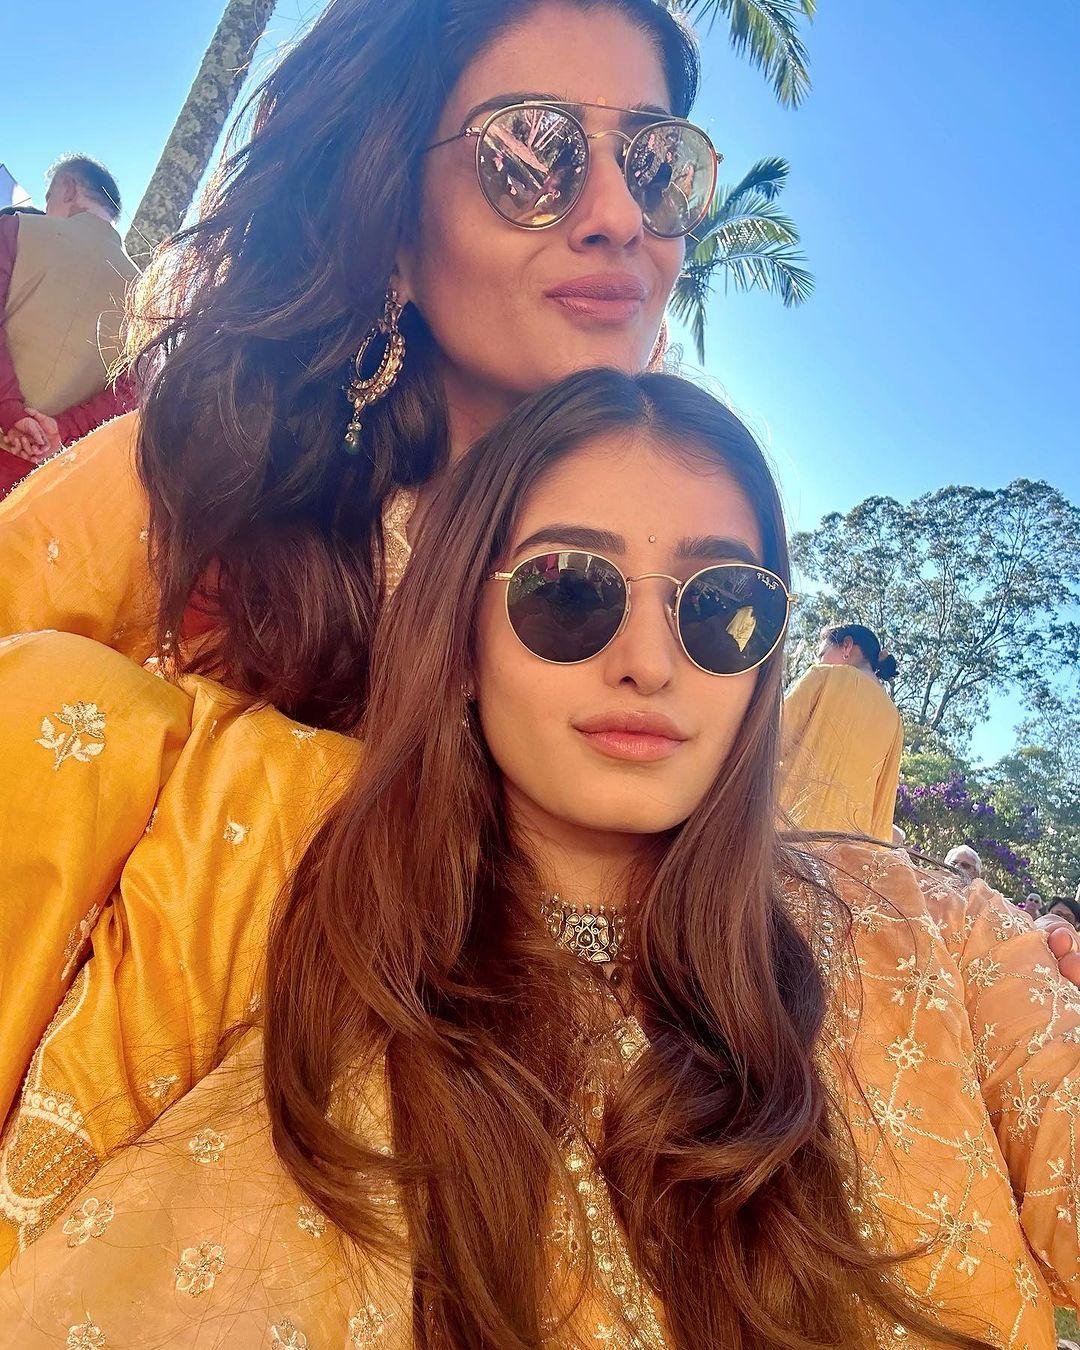 Raveena often talks about the connection they share and how she has raised Rasha